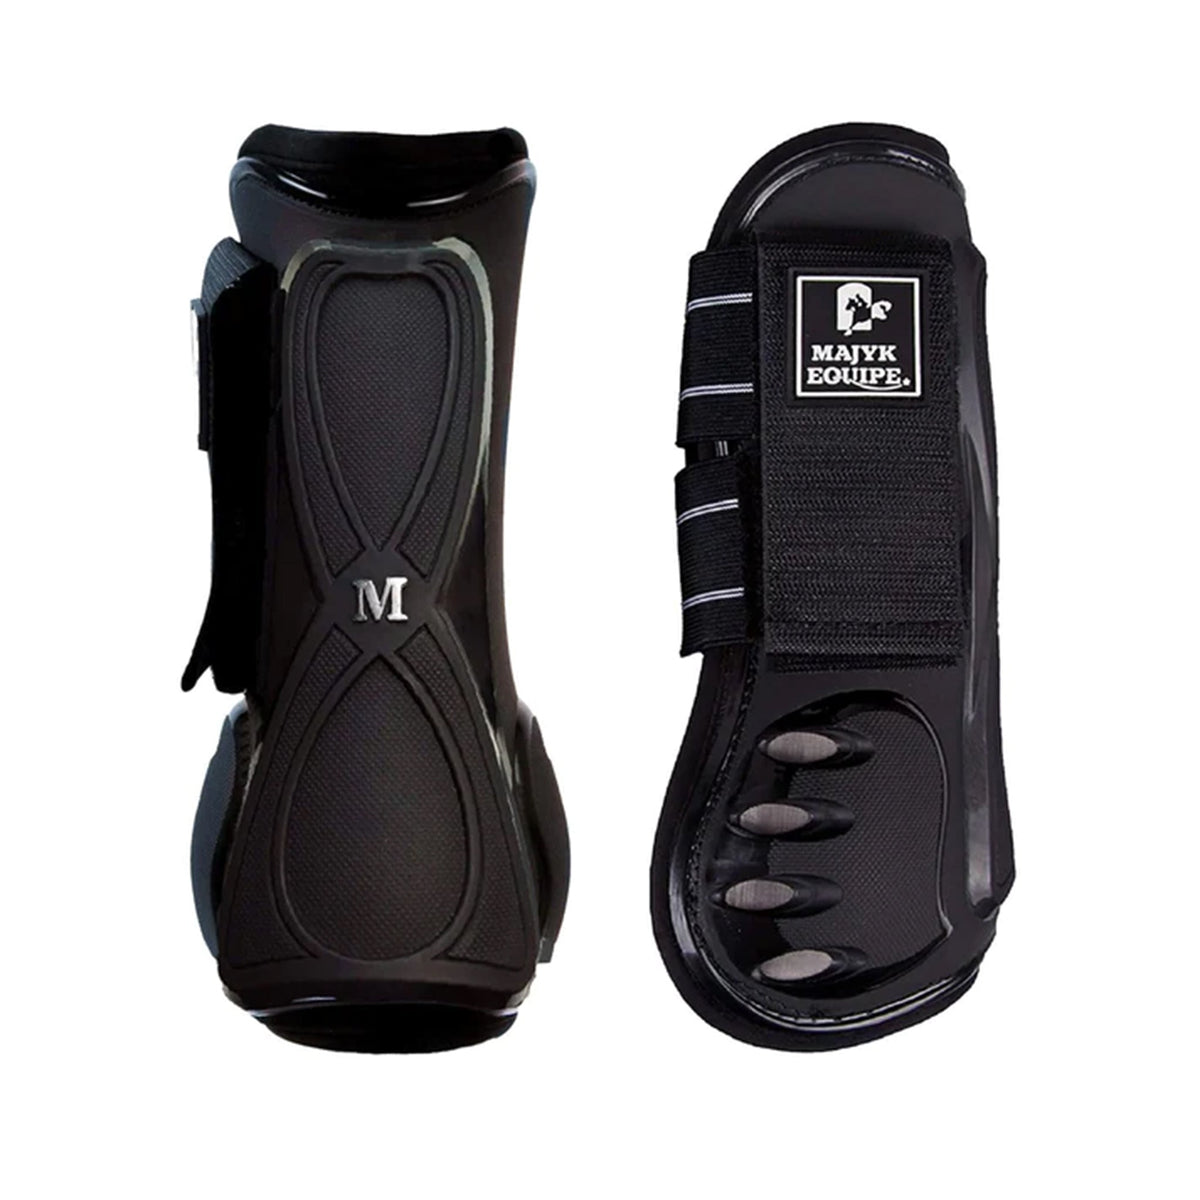 black jump boots with airflow and bio foam